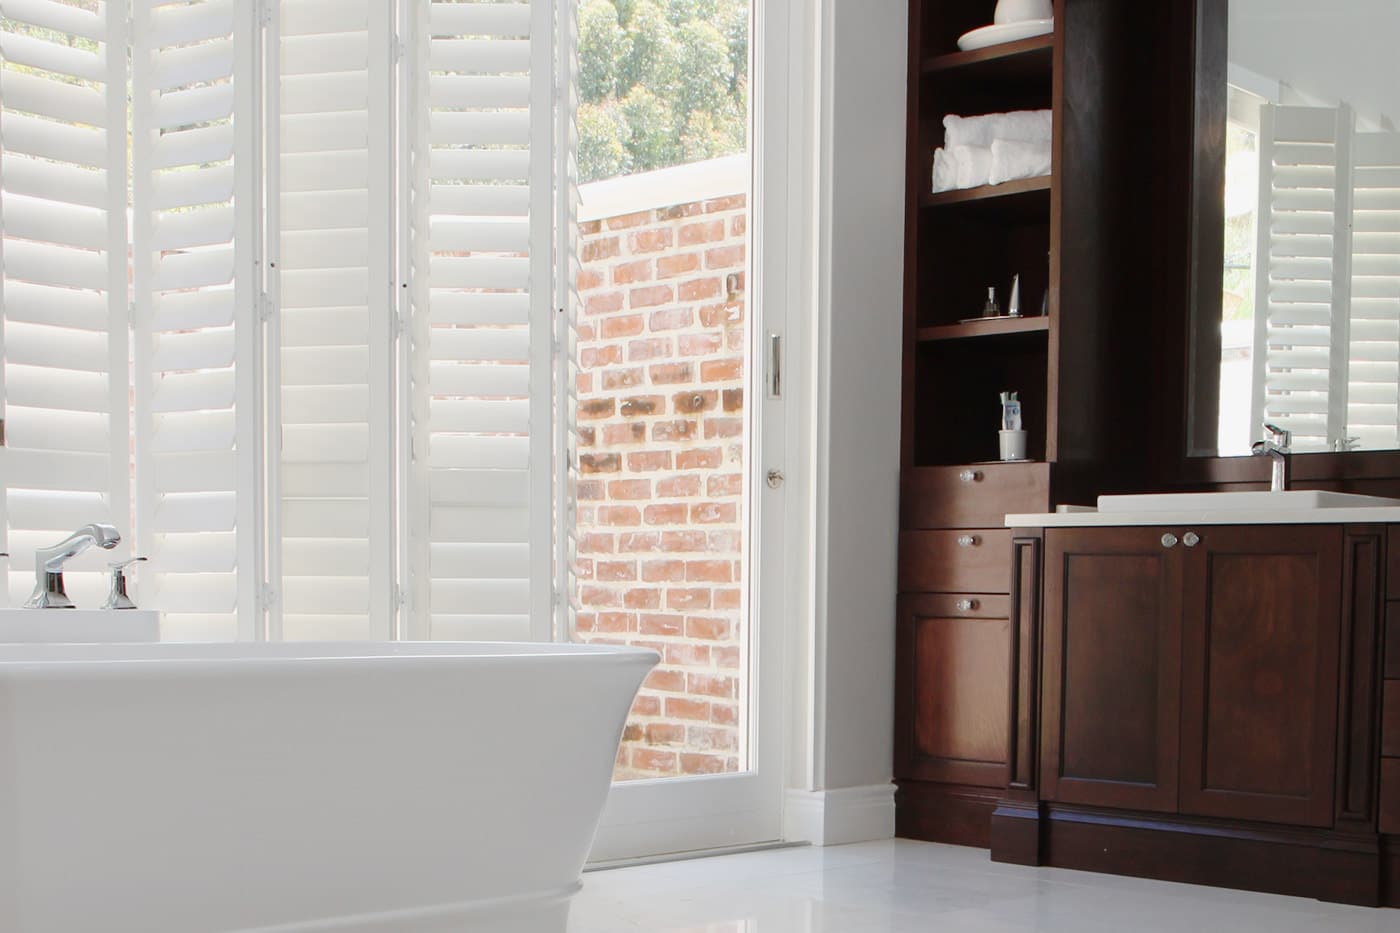 Norman Woodlore Plus Shutters installed in a modern and simple bathroom. Shutters for Sliding Doors.